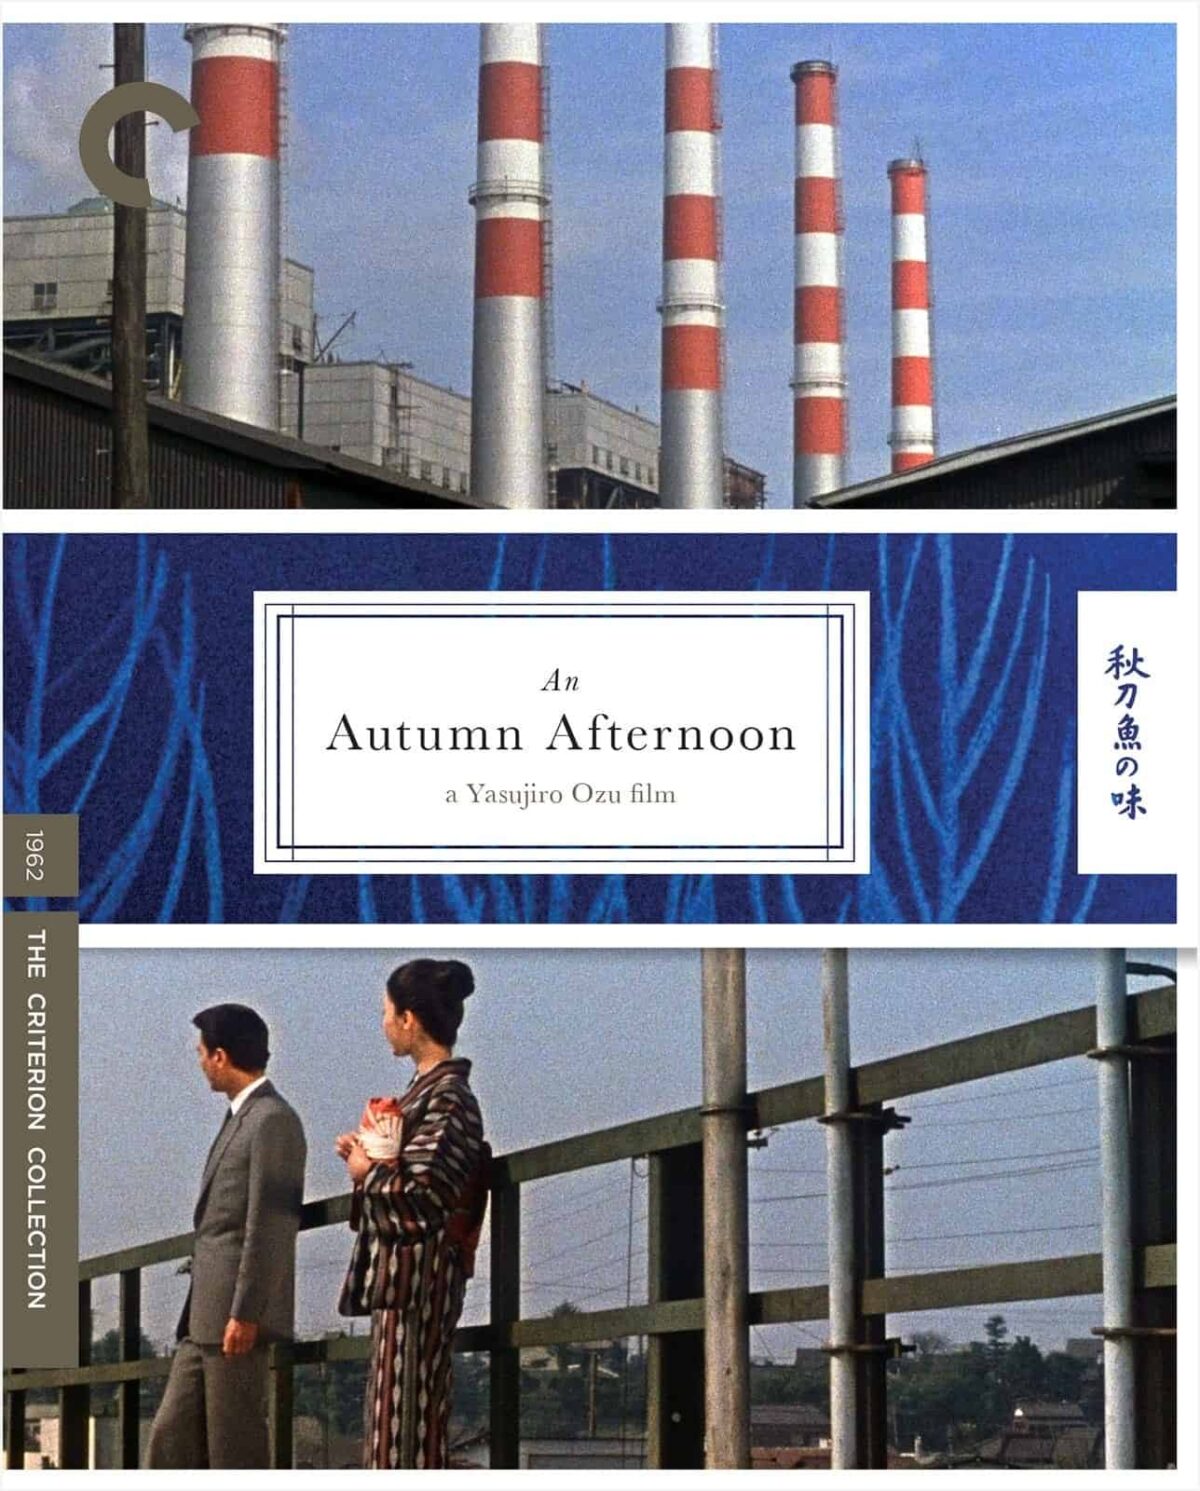 Movie poster for An Autumn Afternoon